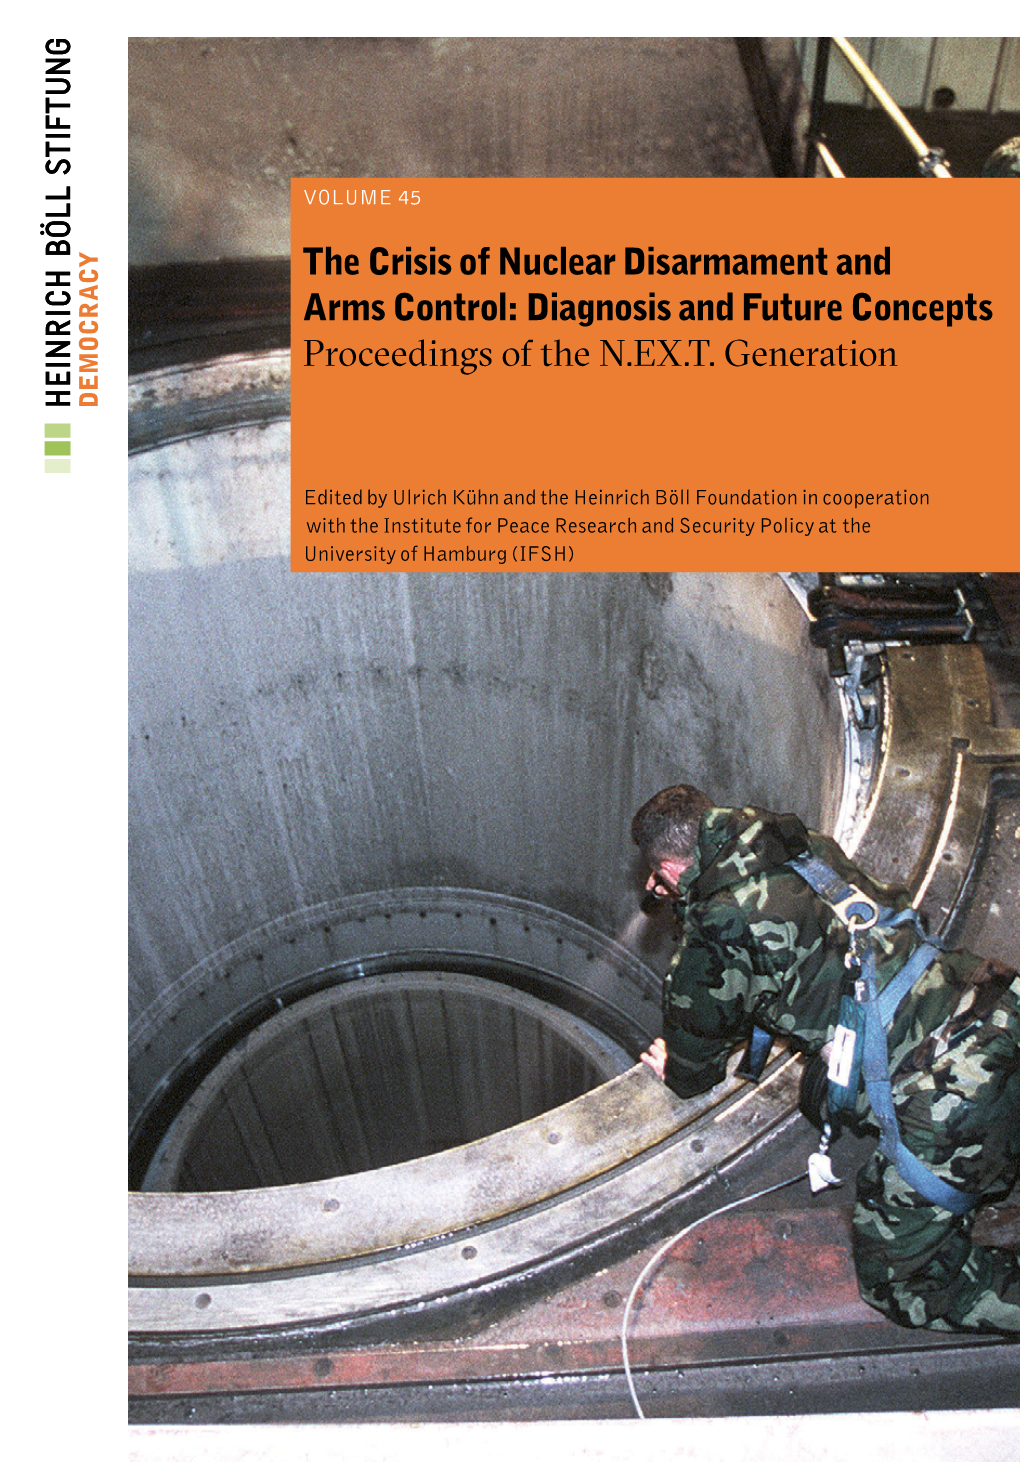 The Crisis of Nuclear Disarmament and Arms Control: Diagnosis and Future Concepts Proceedings of the N.EX.T